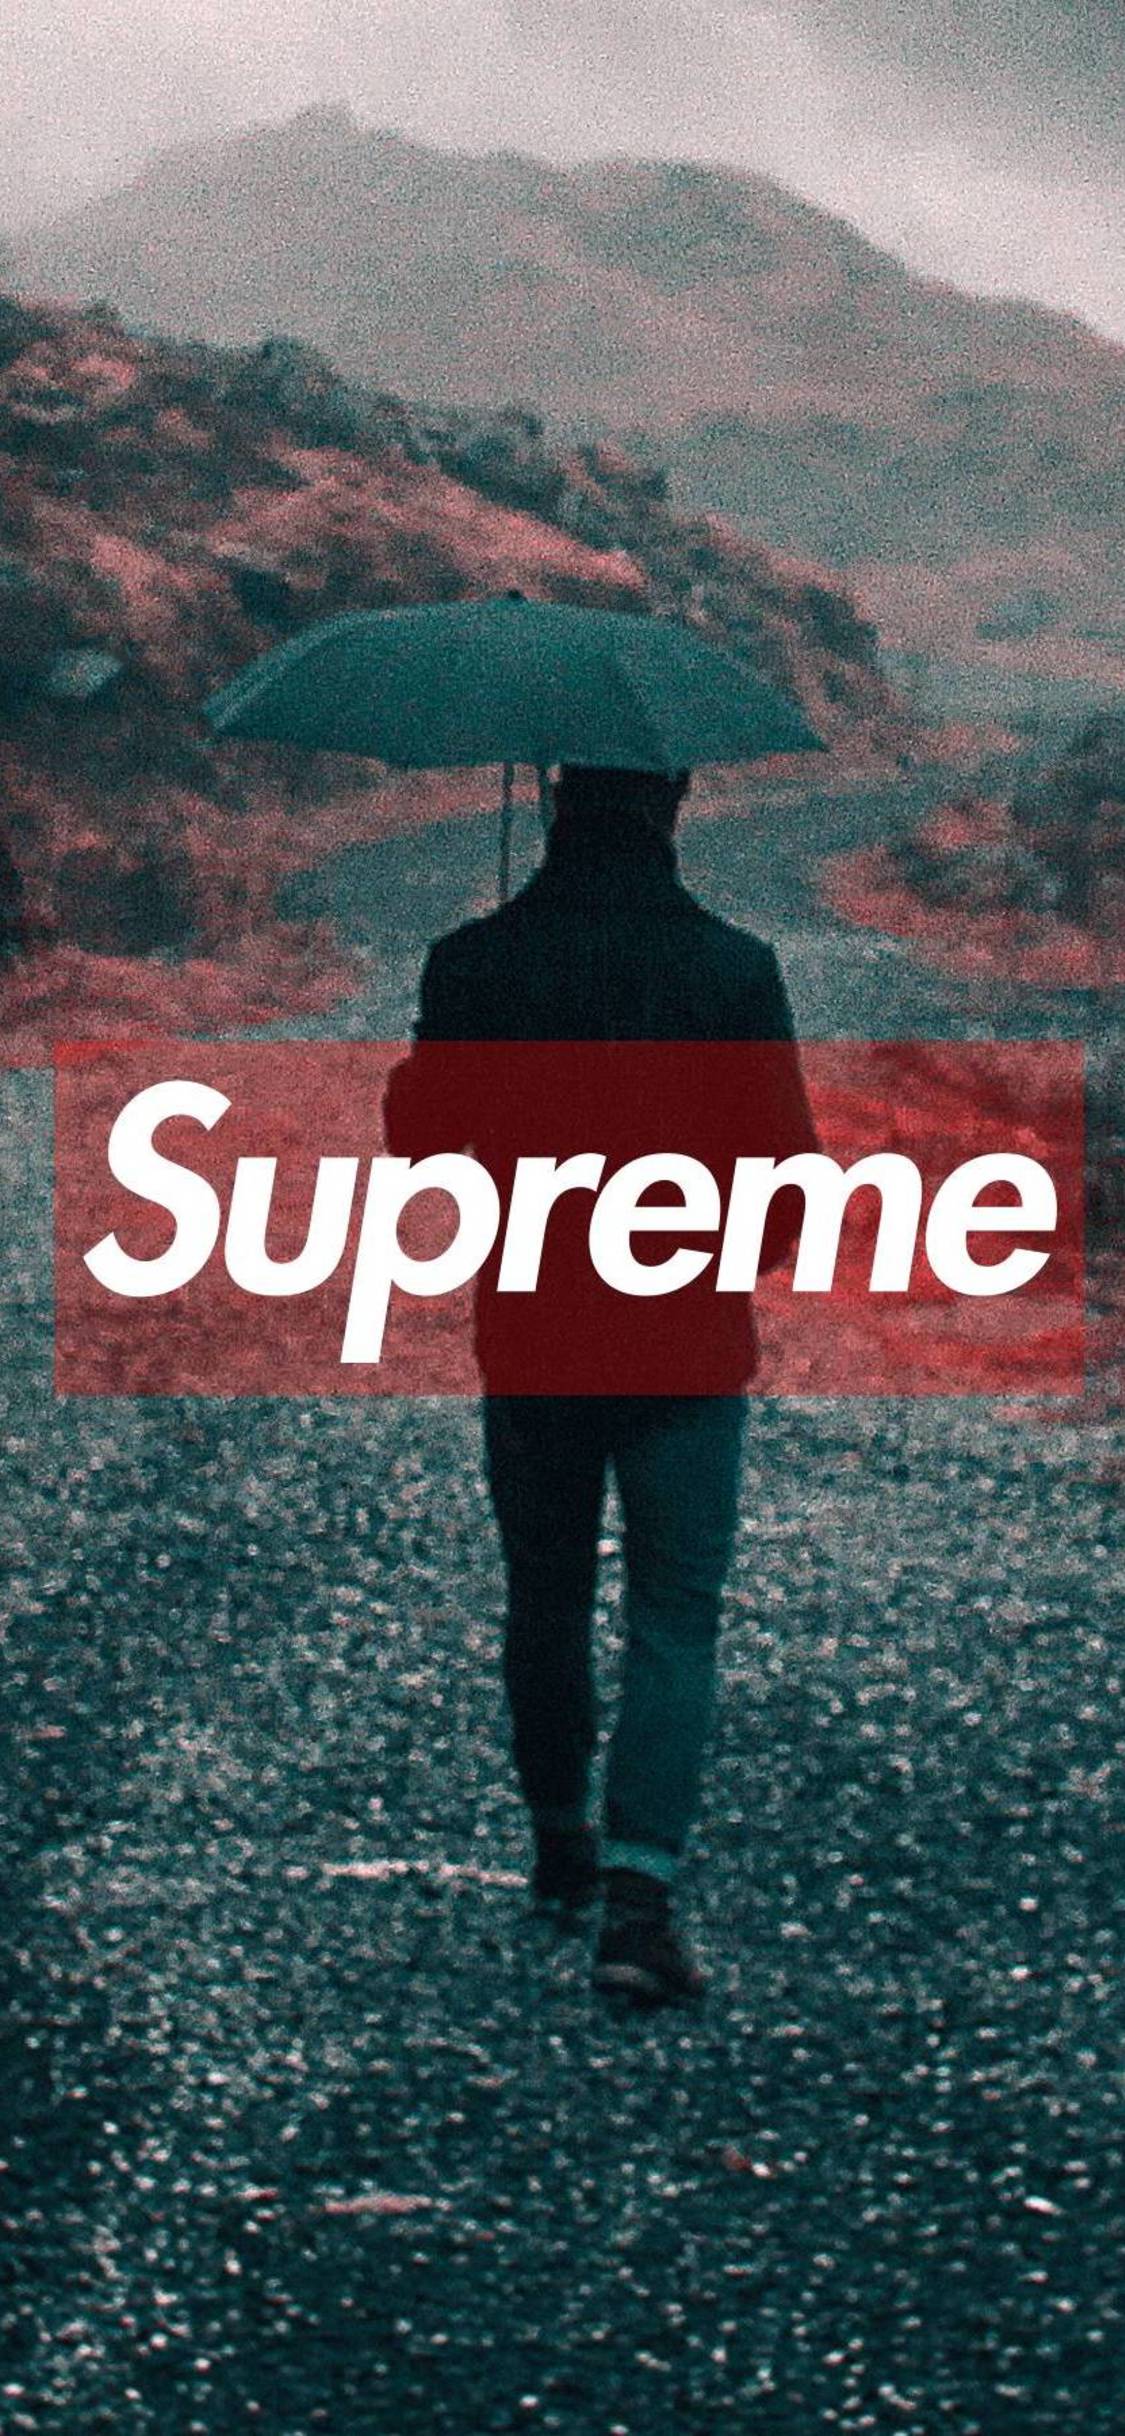 Free Download Supreme Iphone X Wallpapers Top Supreme Iphone X 1125x2436 For Your Desktop Mobile Tablet Explore 55 Illuminati Supreme Iphone Wallpaper Illuminati Supreme Iphone Wallpaper Illuminati Wallpaper Iphone Illuminati Wallpapers